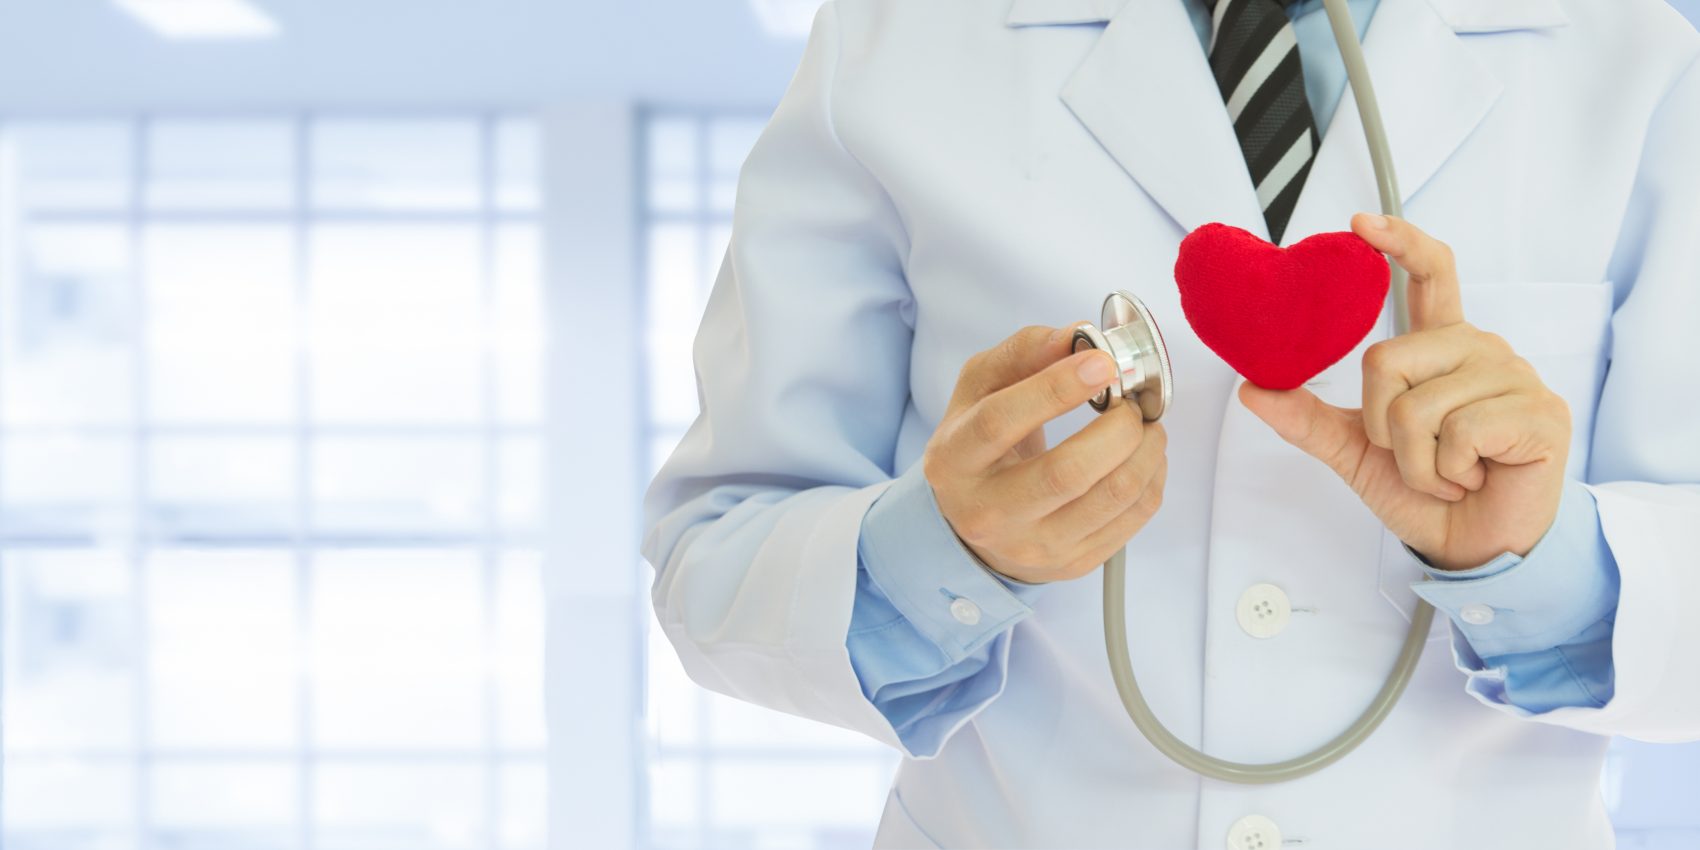 Dentist holding a stethoscope and heart, for a preventative dental health plan contact St. John dentist.